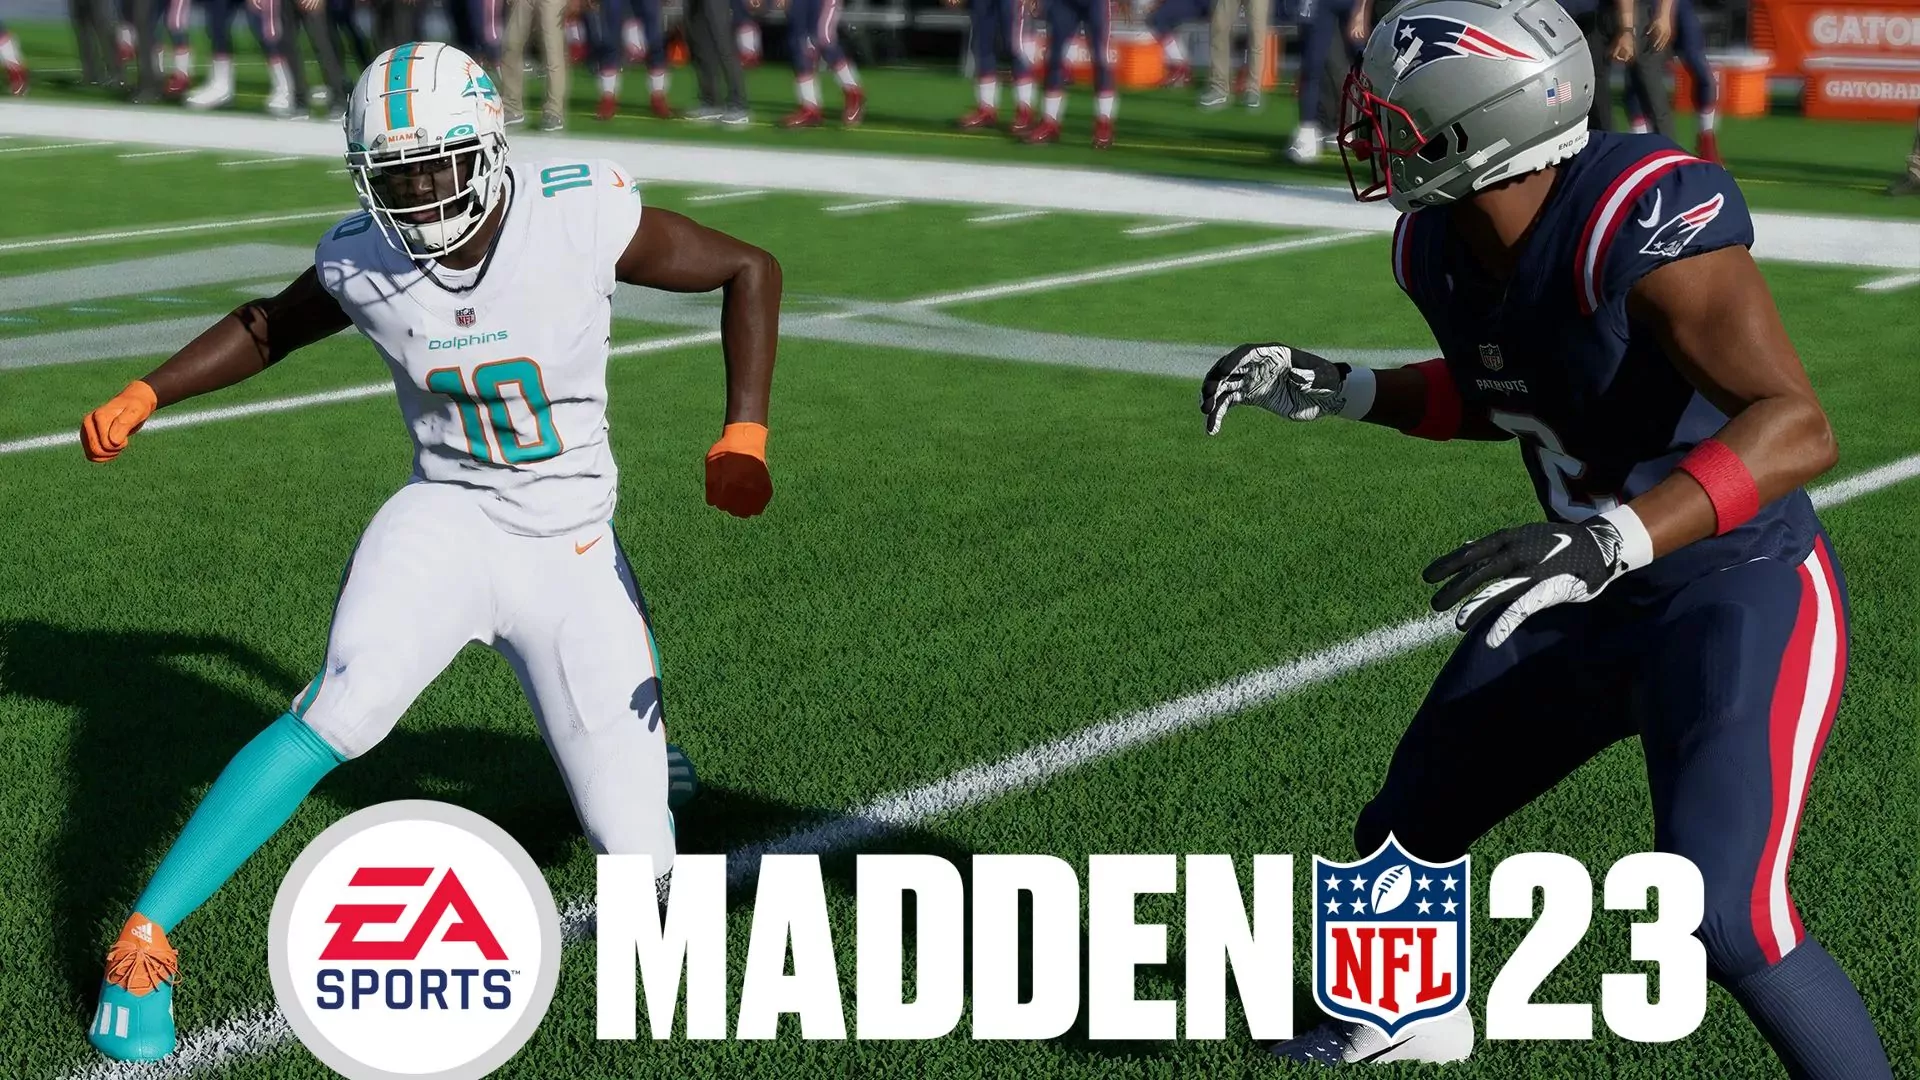 Madden NFL 23 Parents Guide and Age Rating (2022)